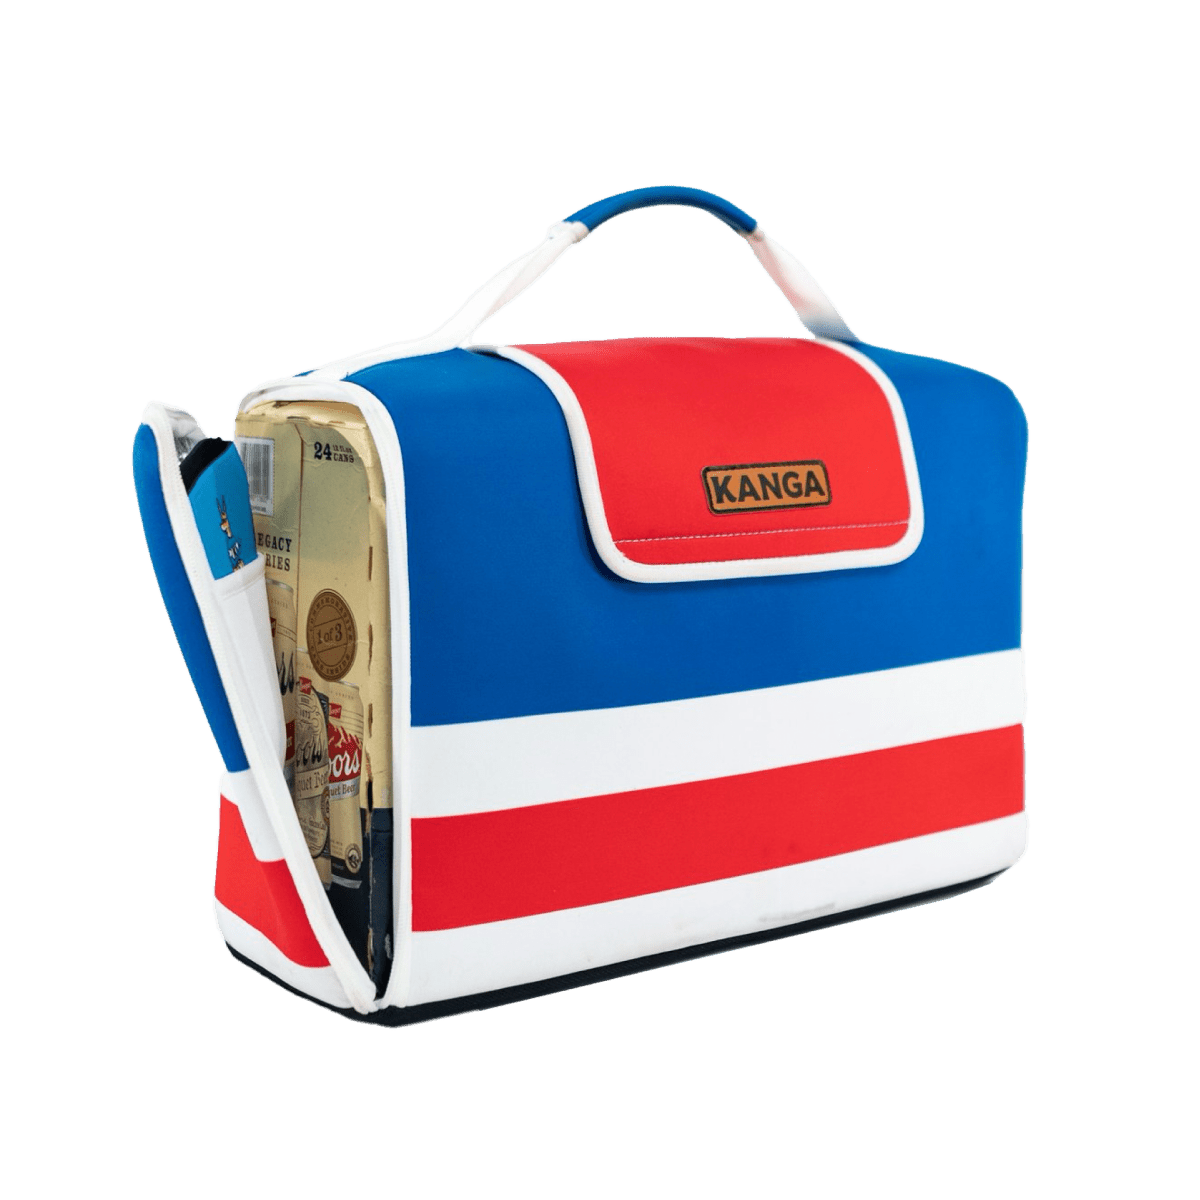 https://cdn.shopify.com/s/files/1/0569/4049/5044/products/university-of-mississippi-kanga-the-kase-mate-cooler-892727_1200x.png?v=1703096338